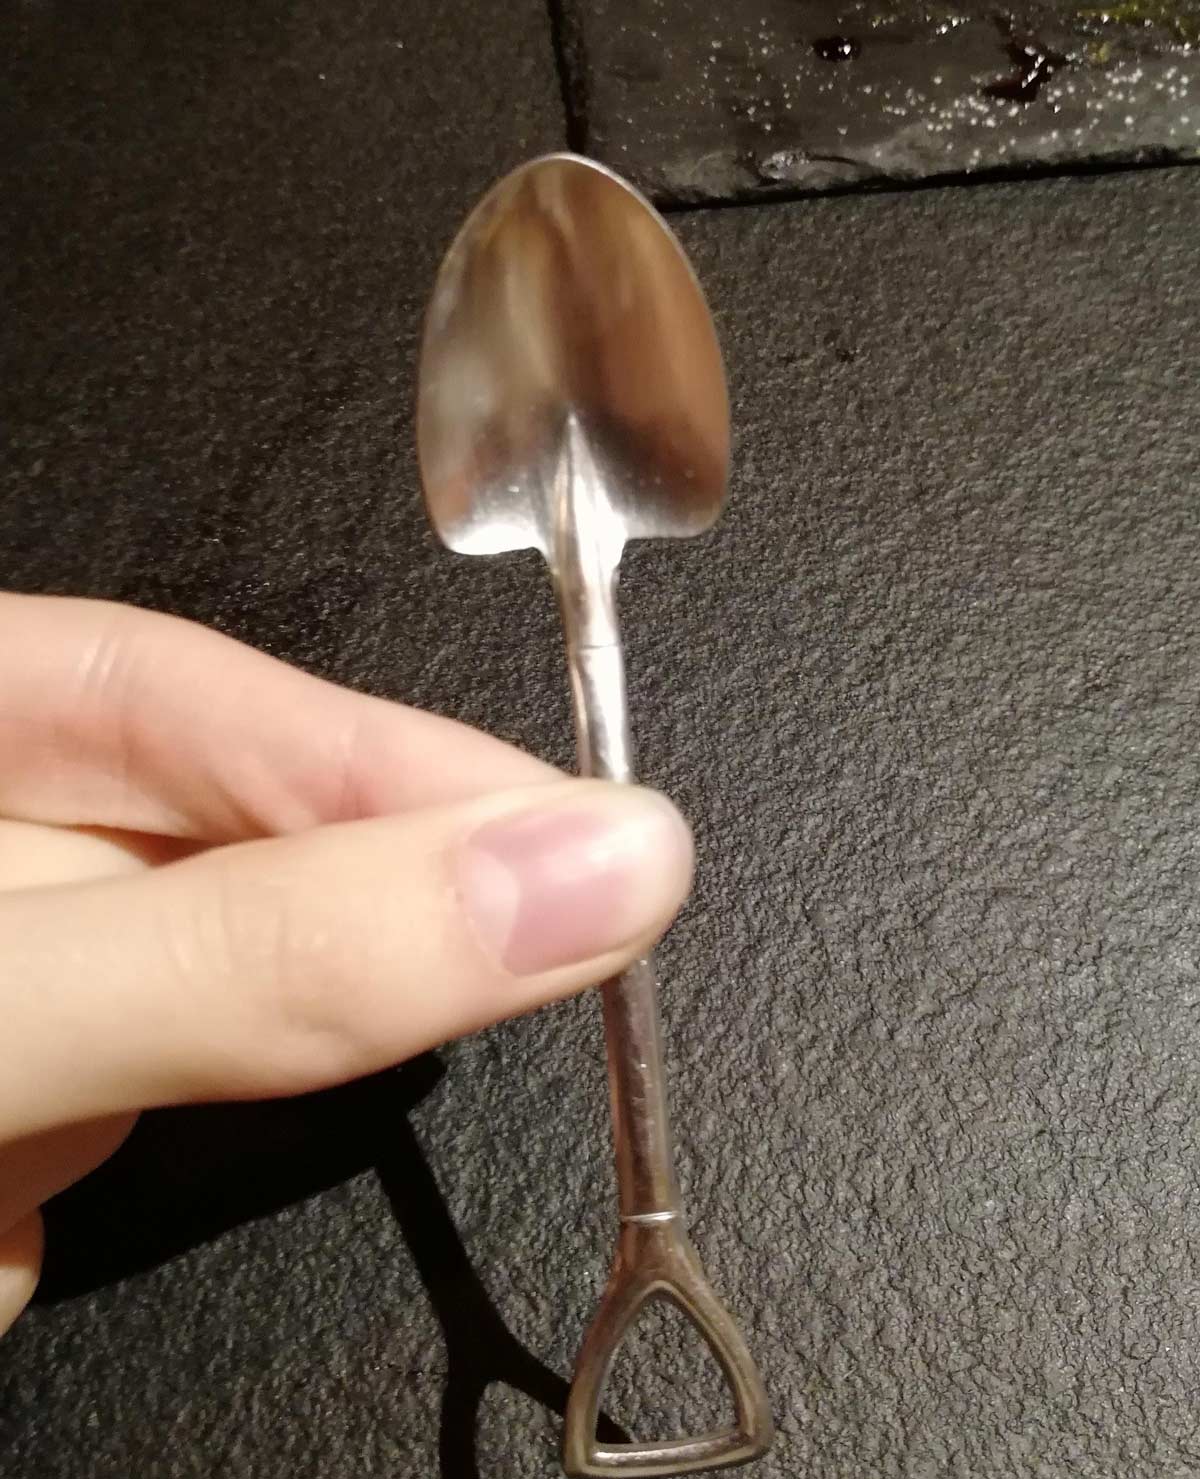 The dessert spoon at a Japanese restaurant in my home city